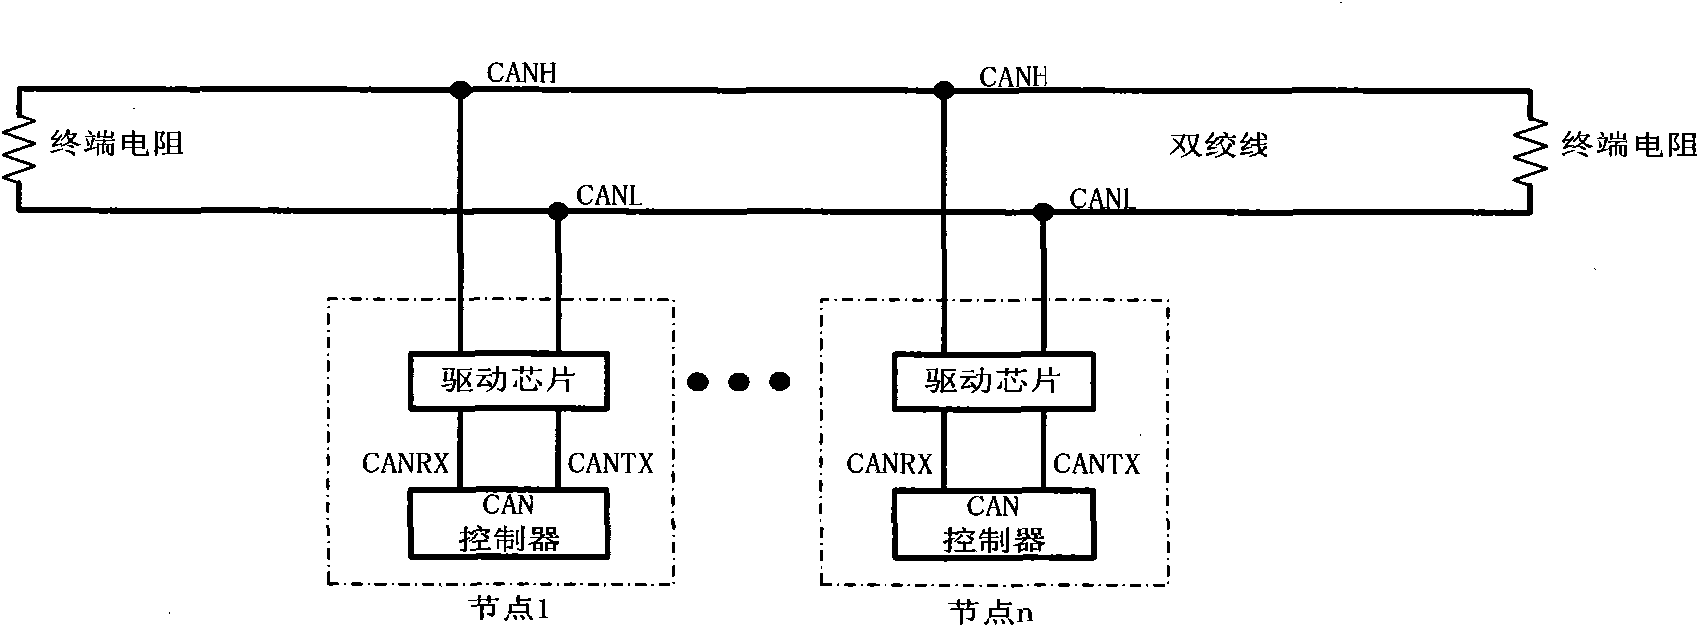 CAN bus physical layer structure based on 1XN passive optical splitter (POS)